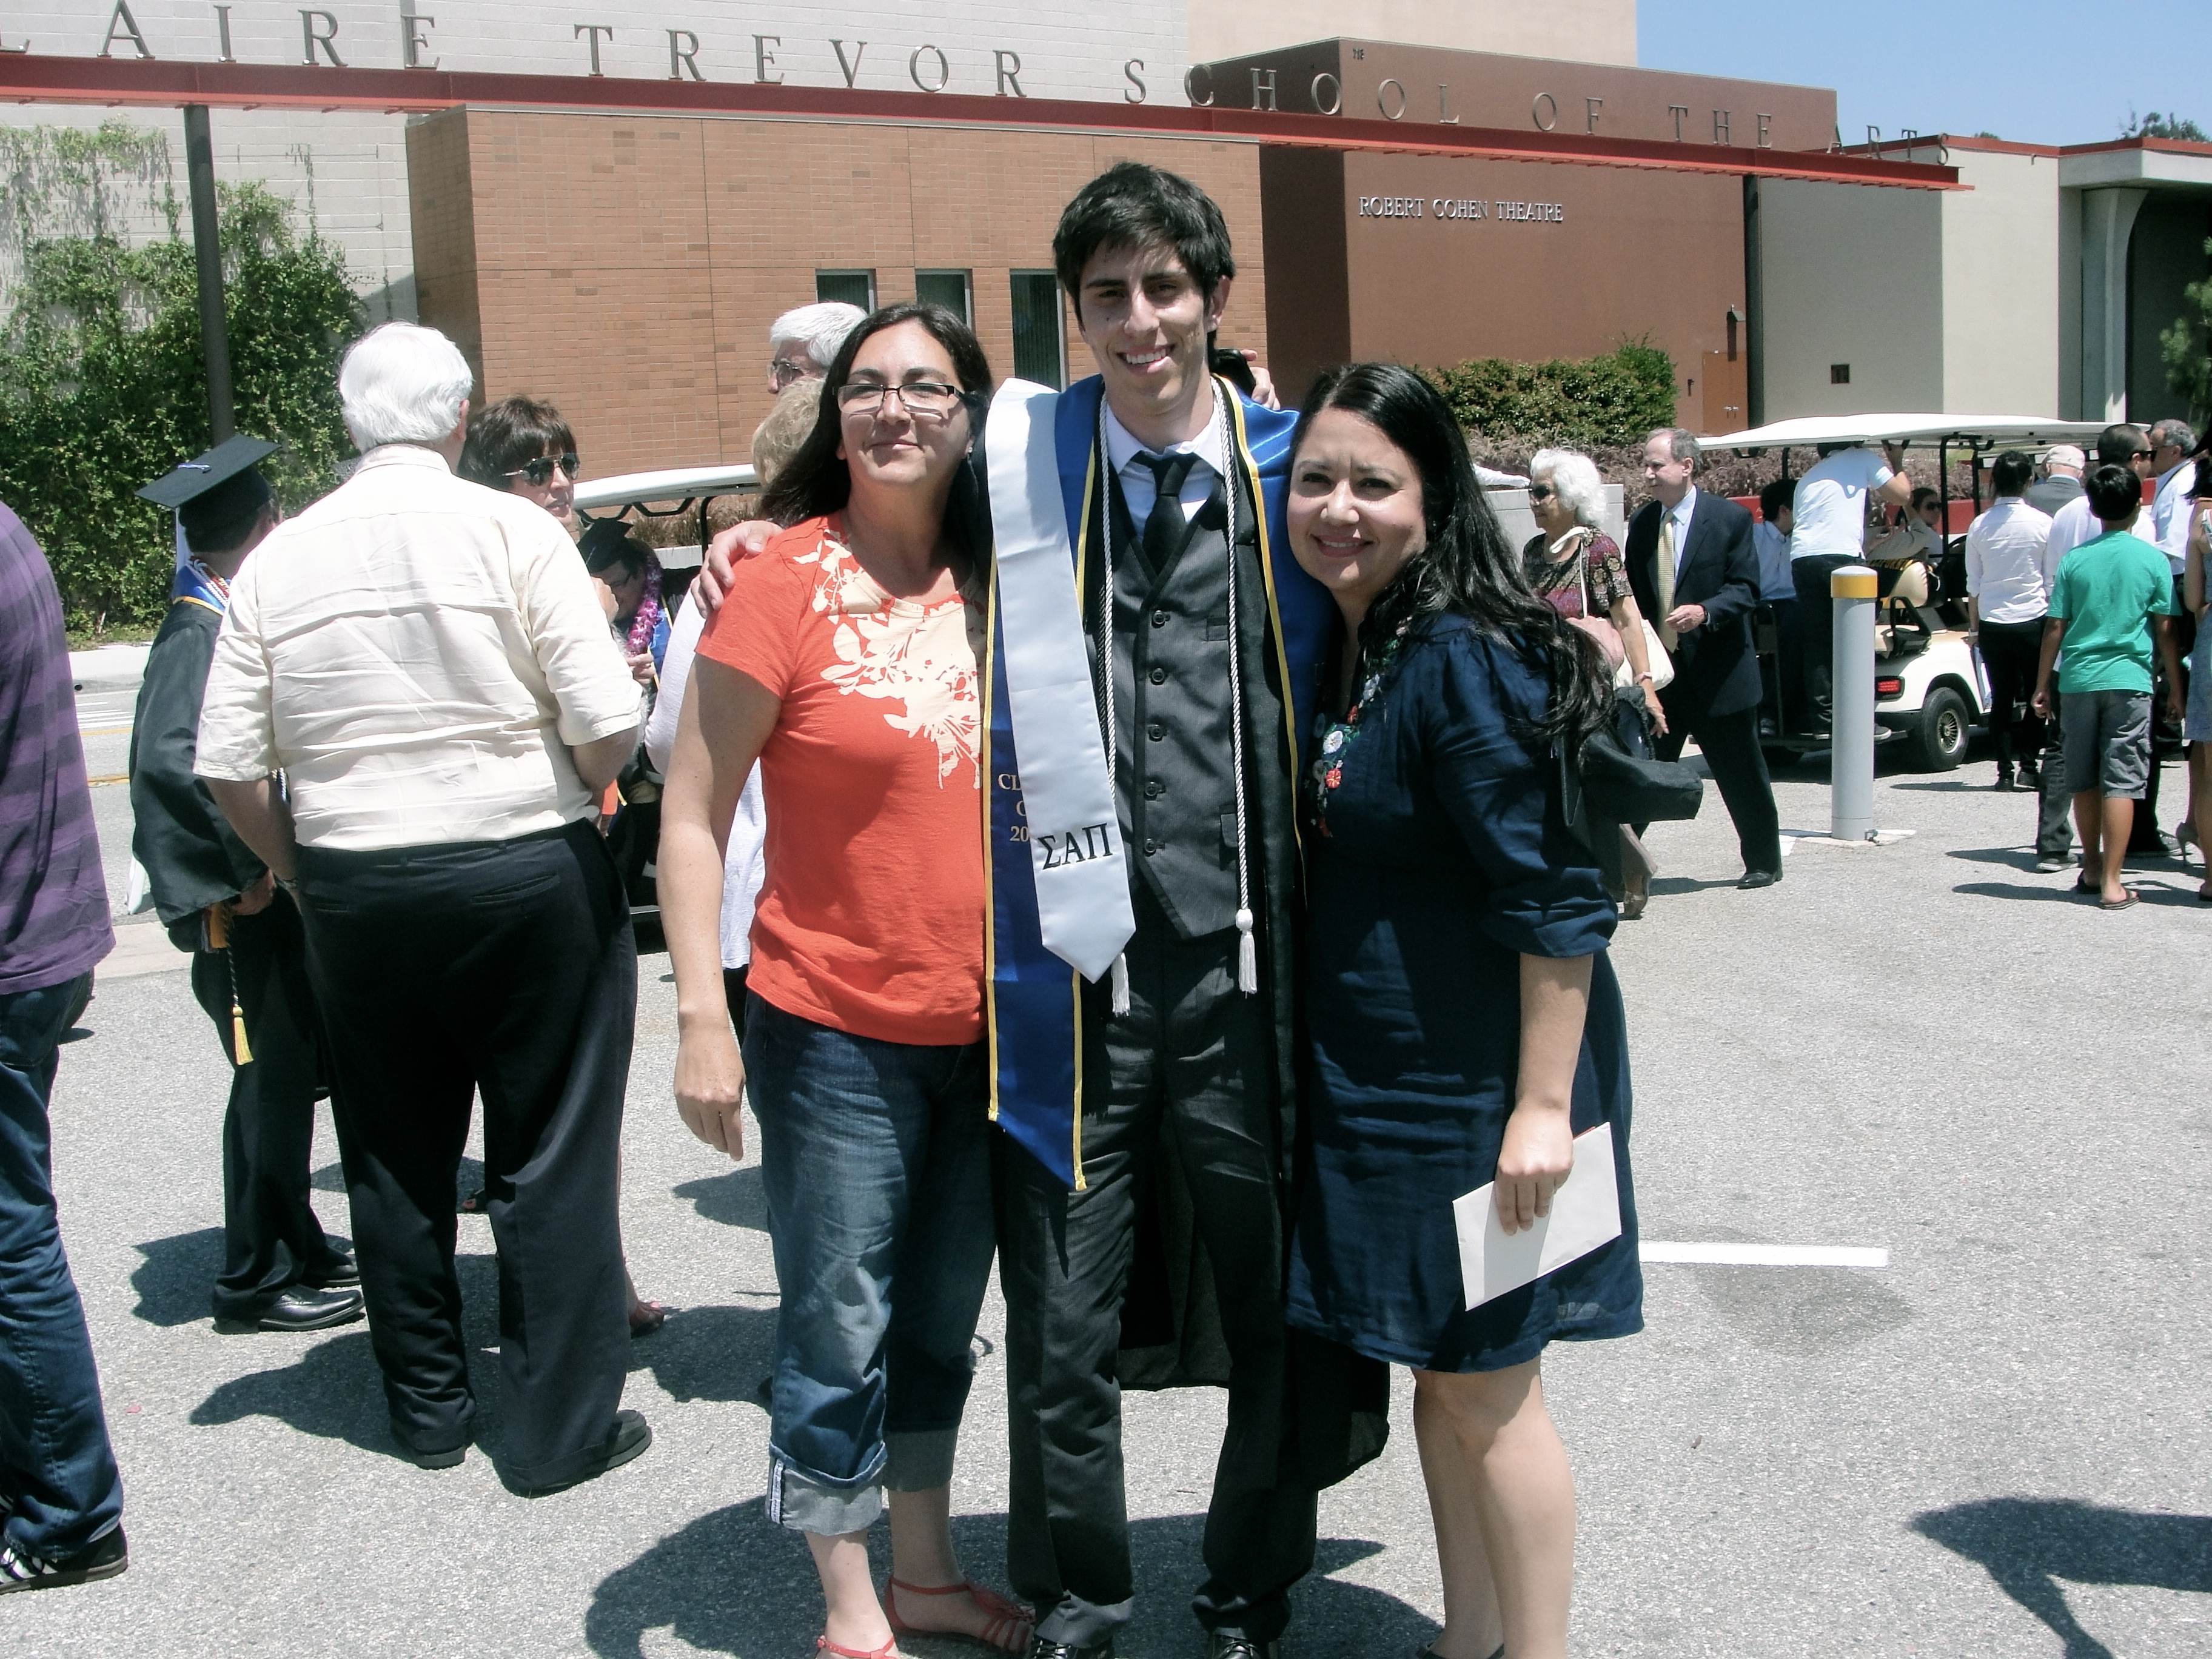 Addison Sandoval with Isabelle and Victoria Gomez at the Forty Seventh Annual Commencement at the University of California Irvine 2012.